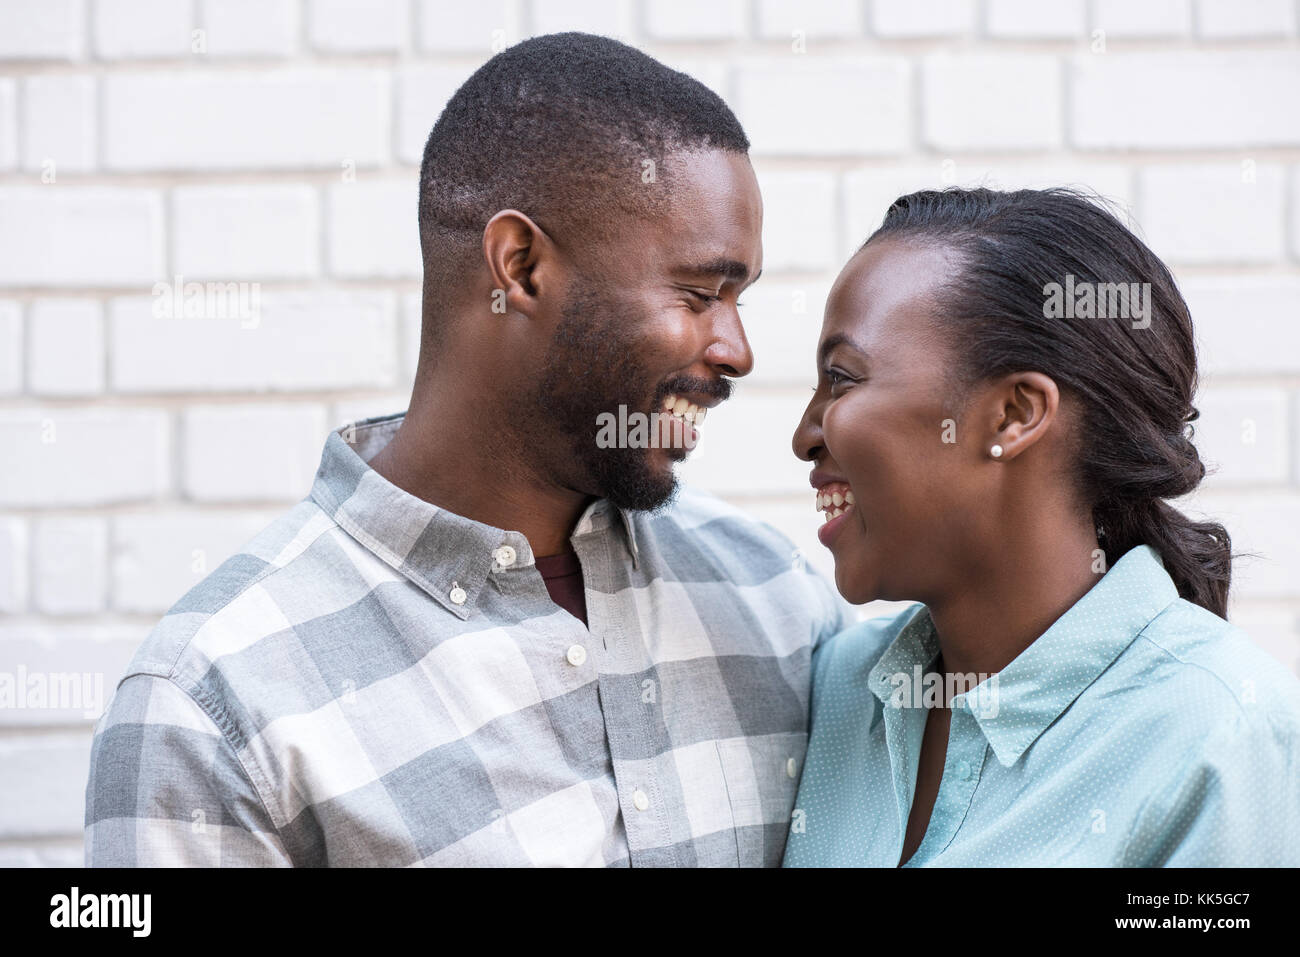 Content African couple smiling at each other in the city Stock Photo